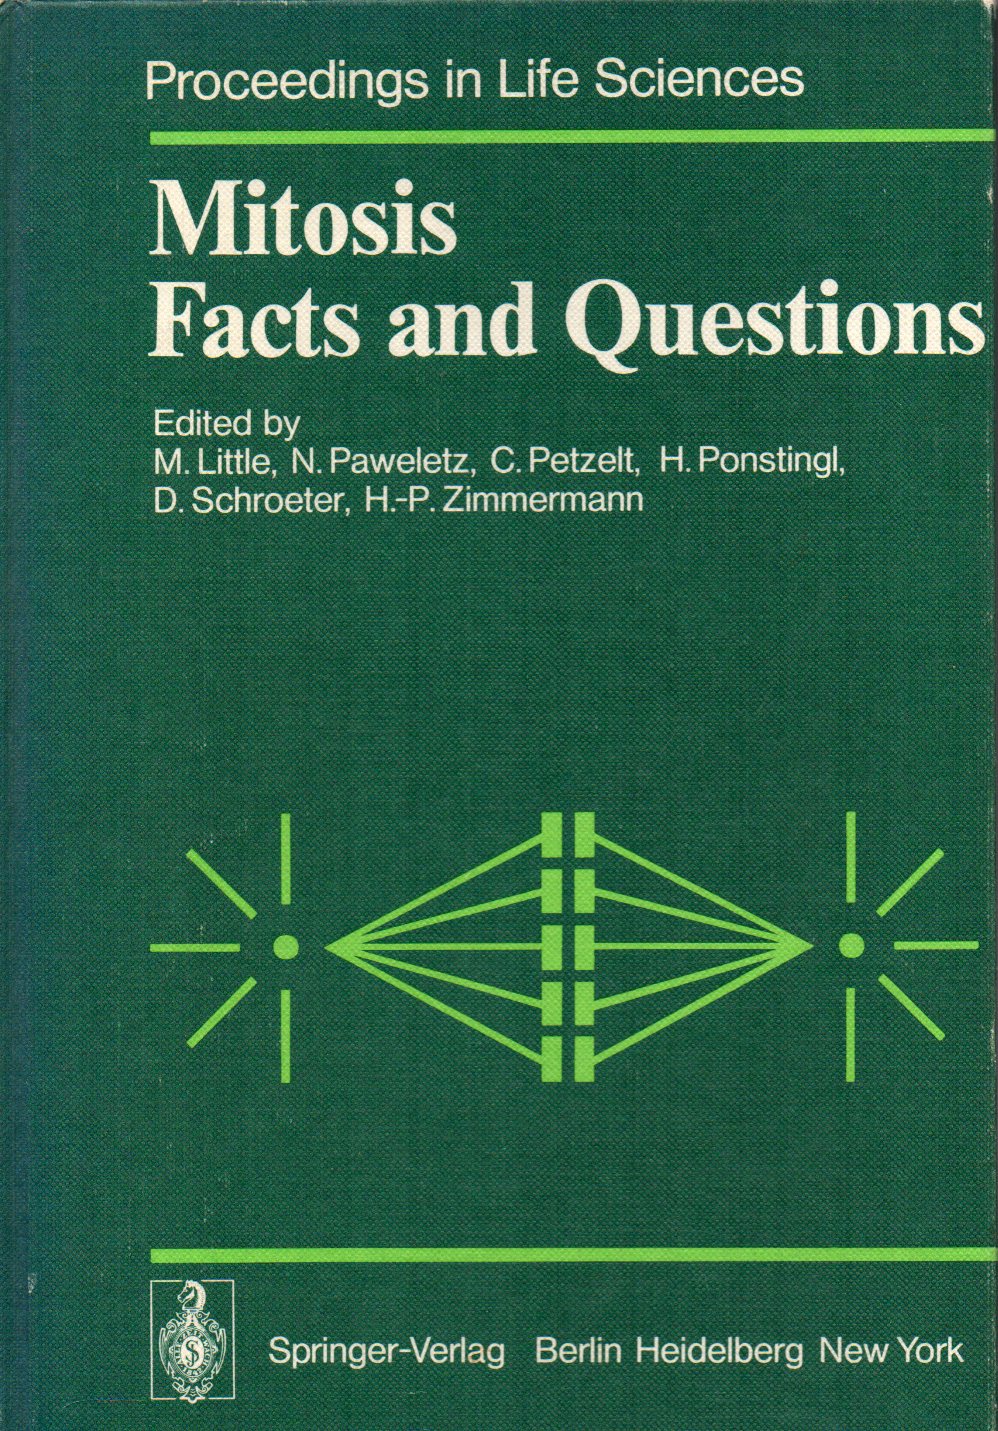 Little,M.+N.Paweletz+C.Petzelt u.a.  Mitosis facts and questions 